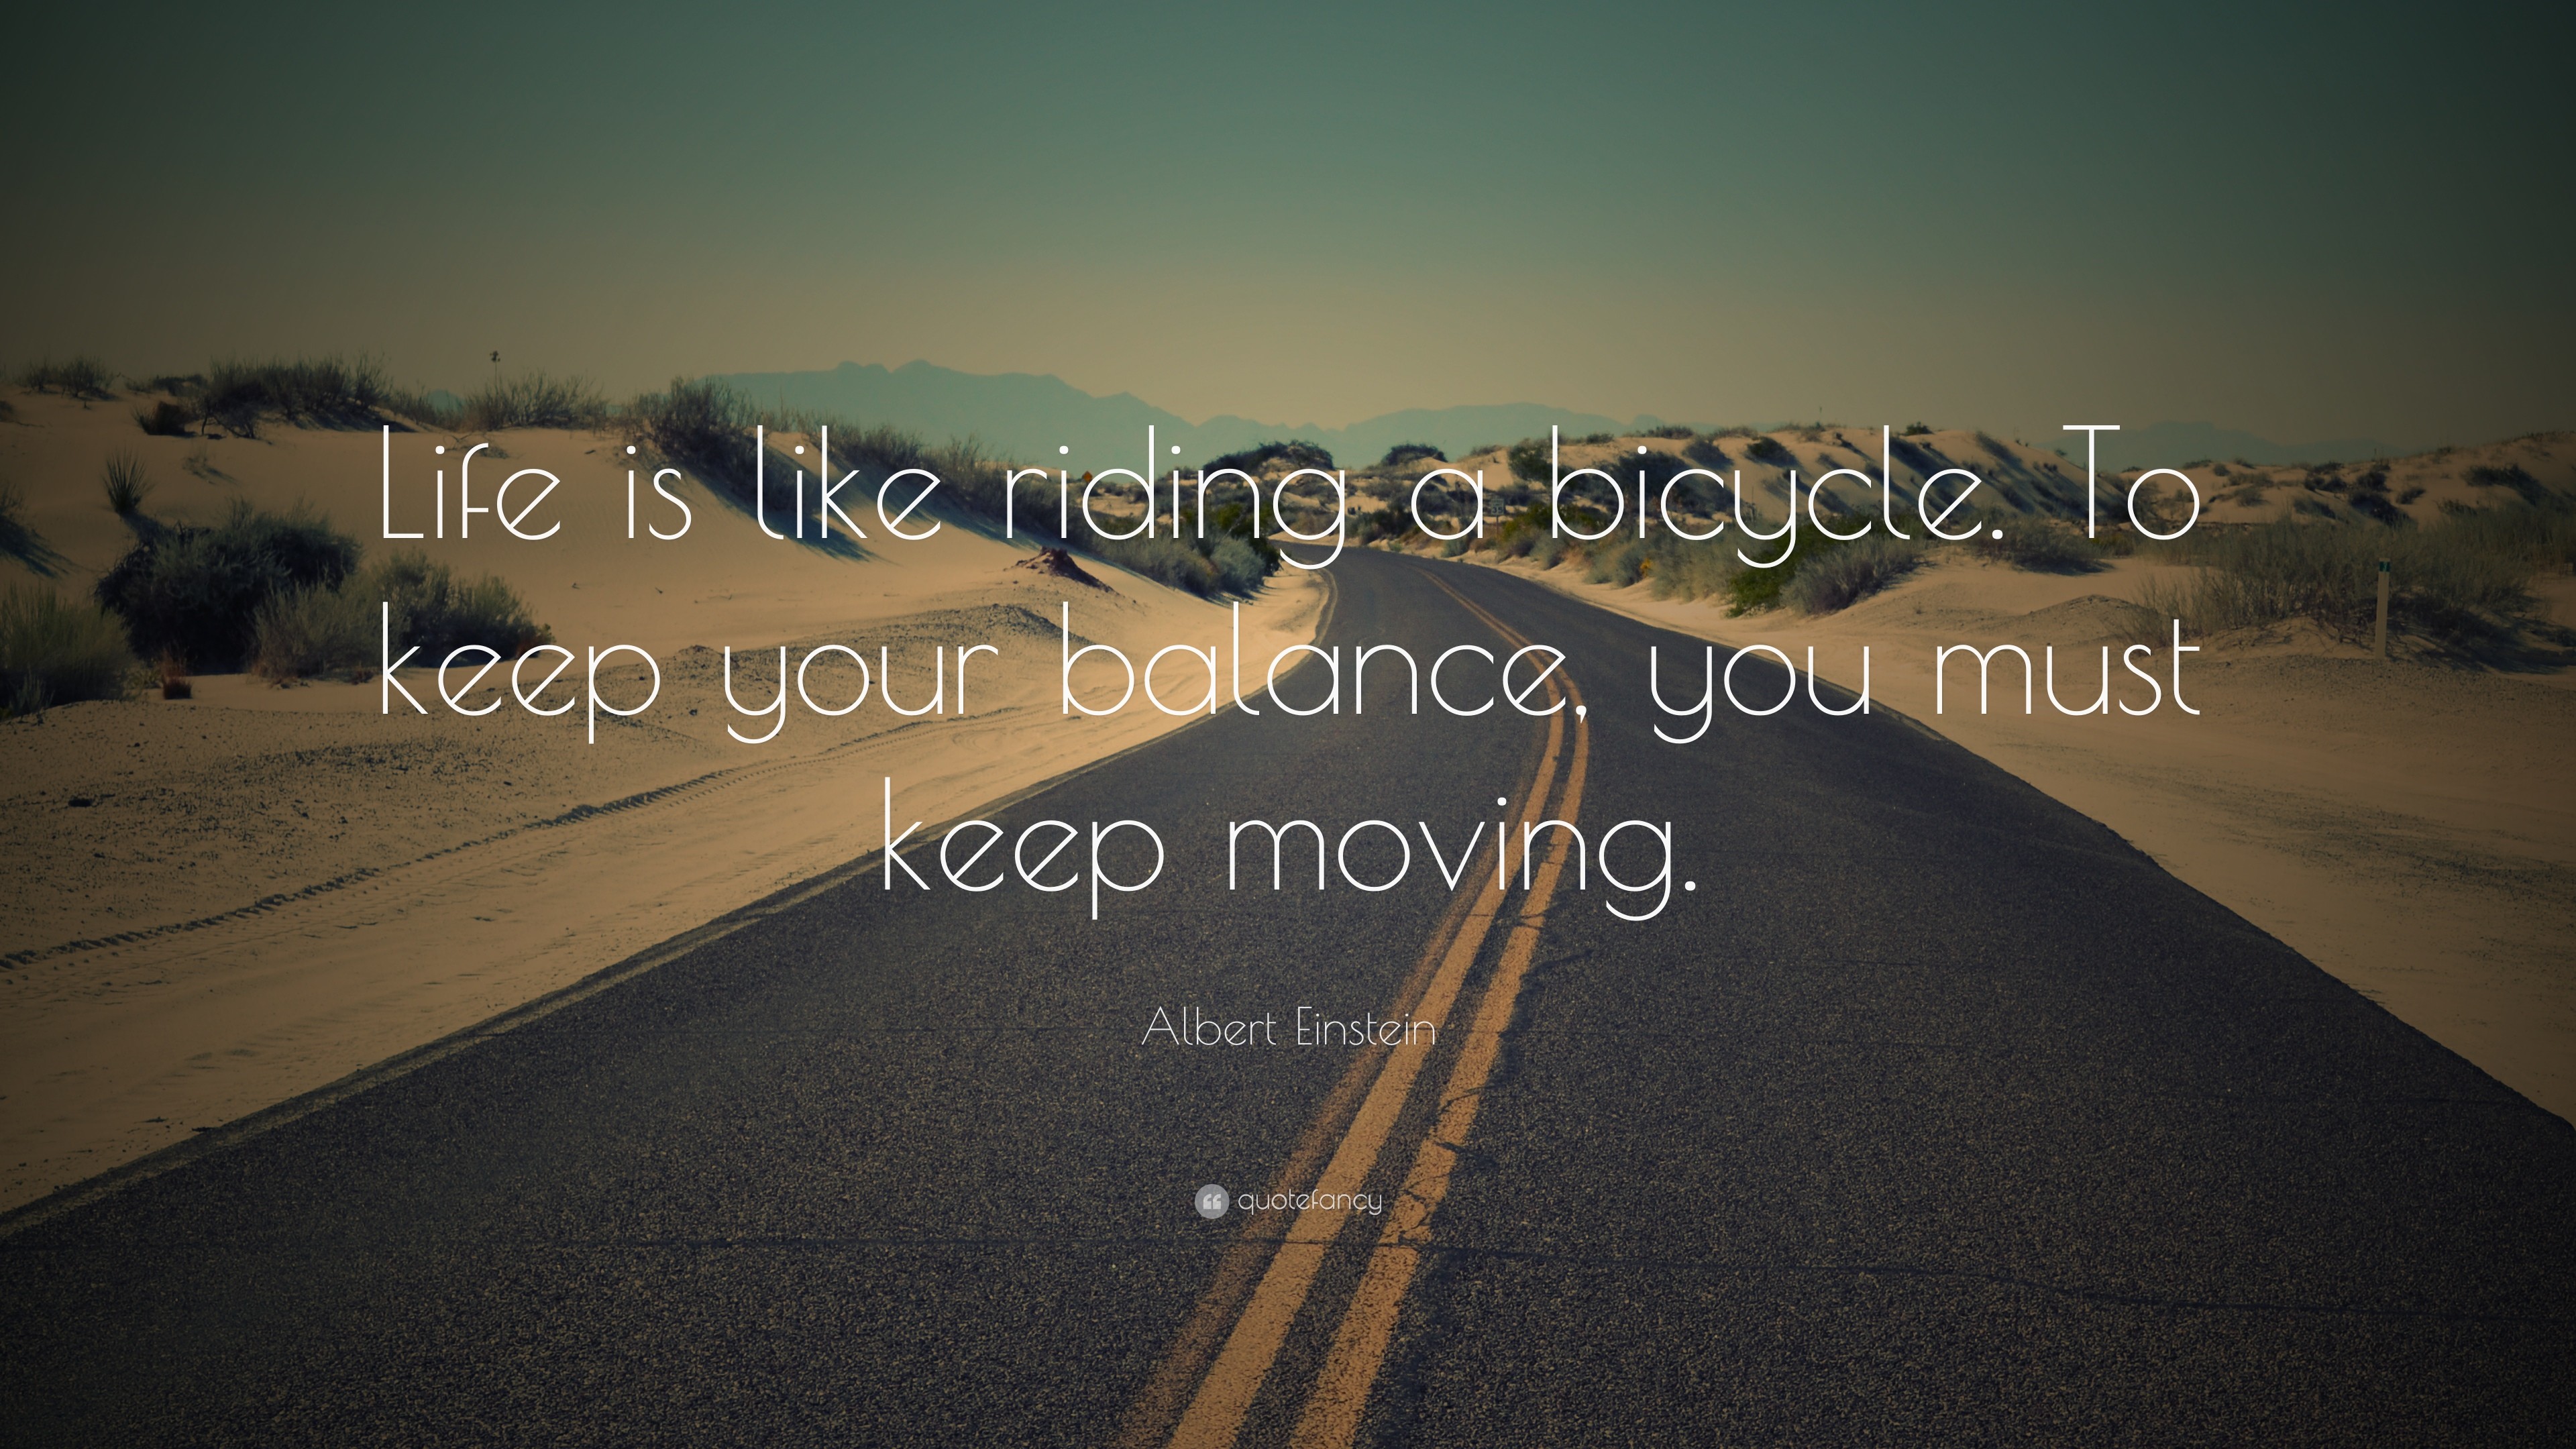 3840x2160 Life Quotes: “Life is like riding a bicycle. To keep your balance,